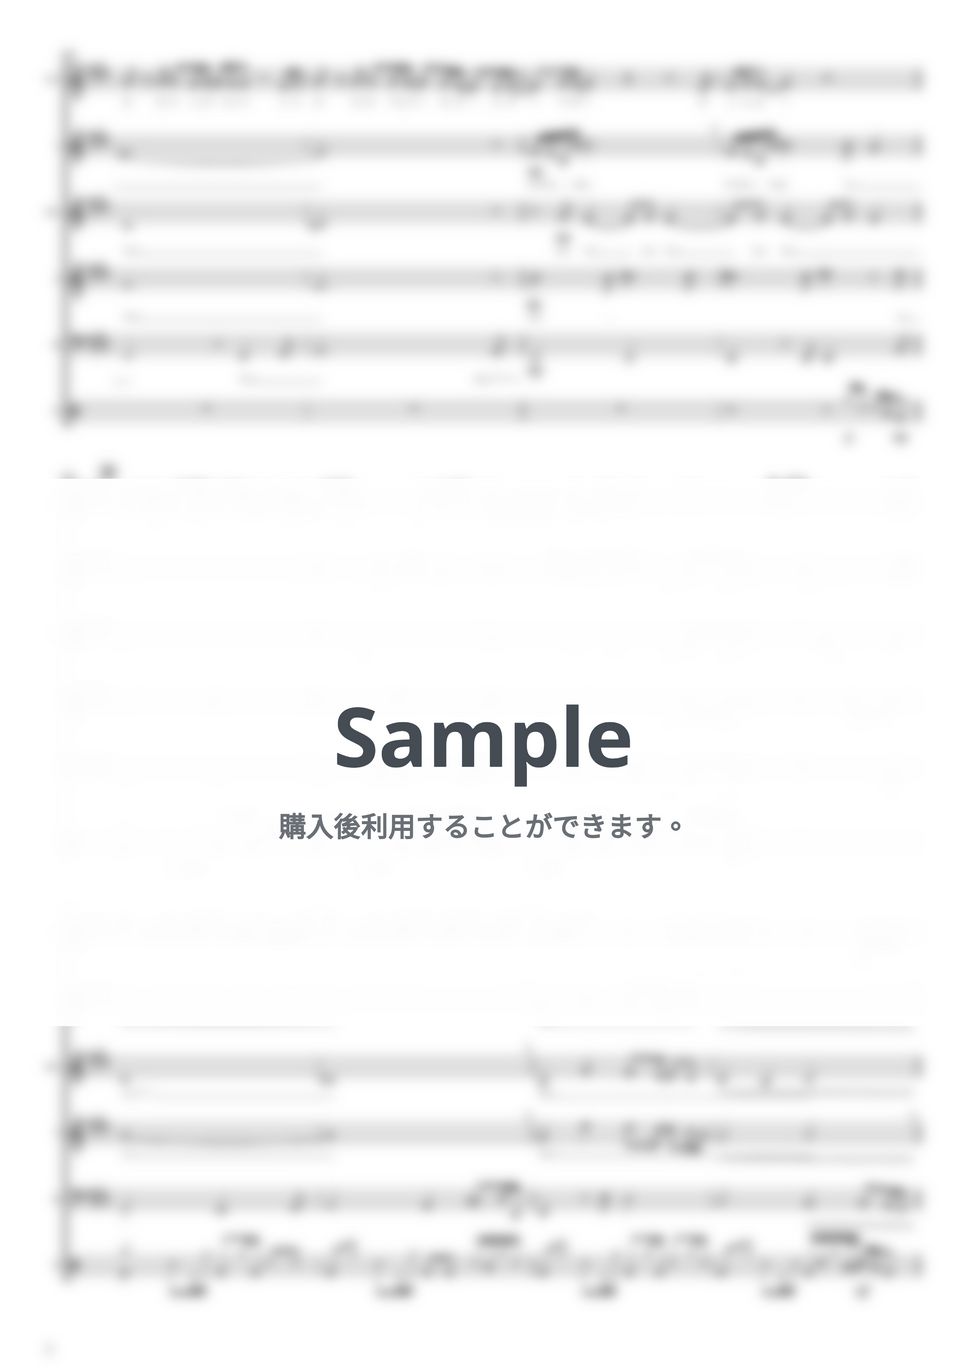 Official髭男dism - Laughter (アカペラ楽譜,pdf+muse(zip)セット) by まーびーショップ